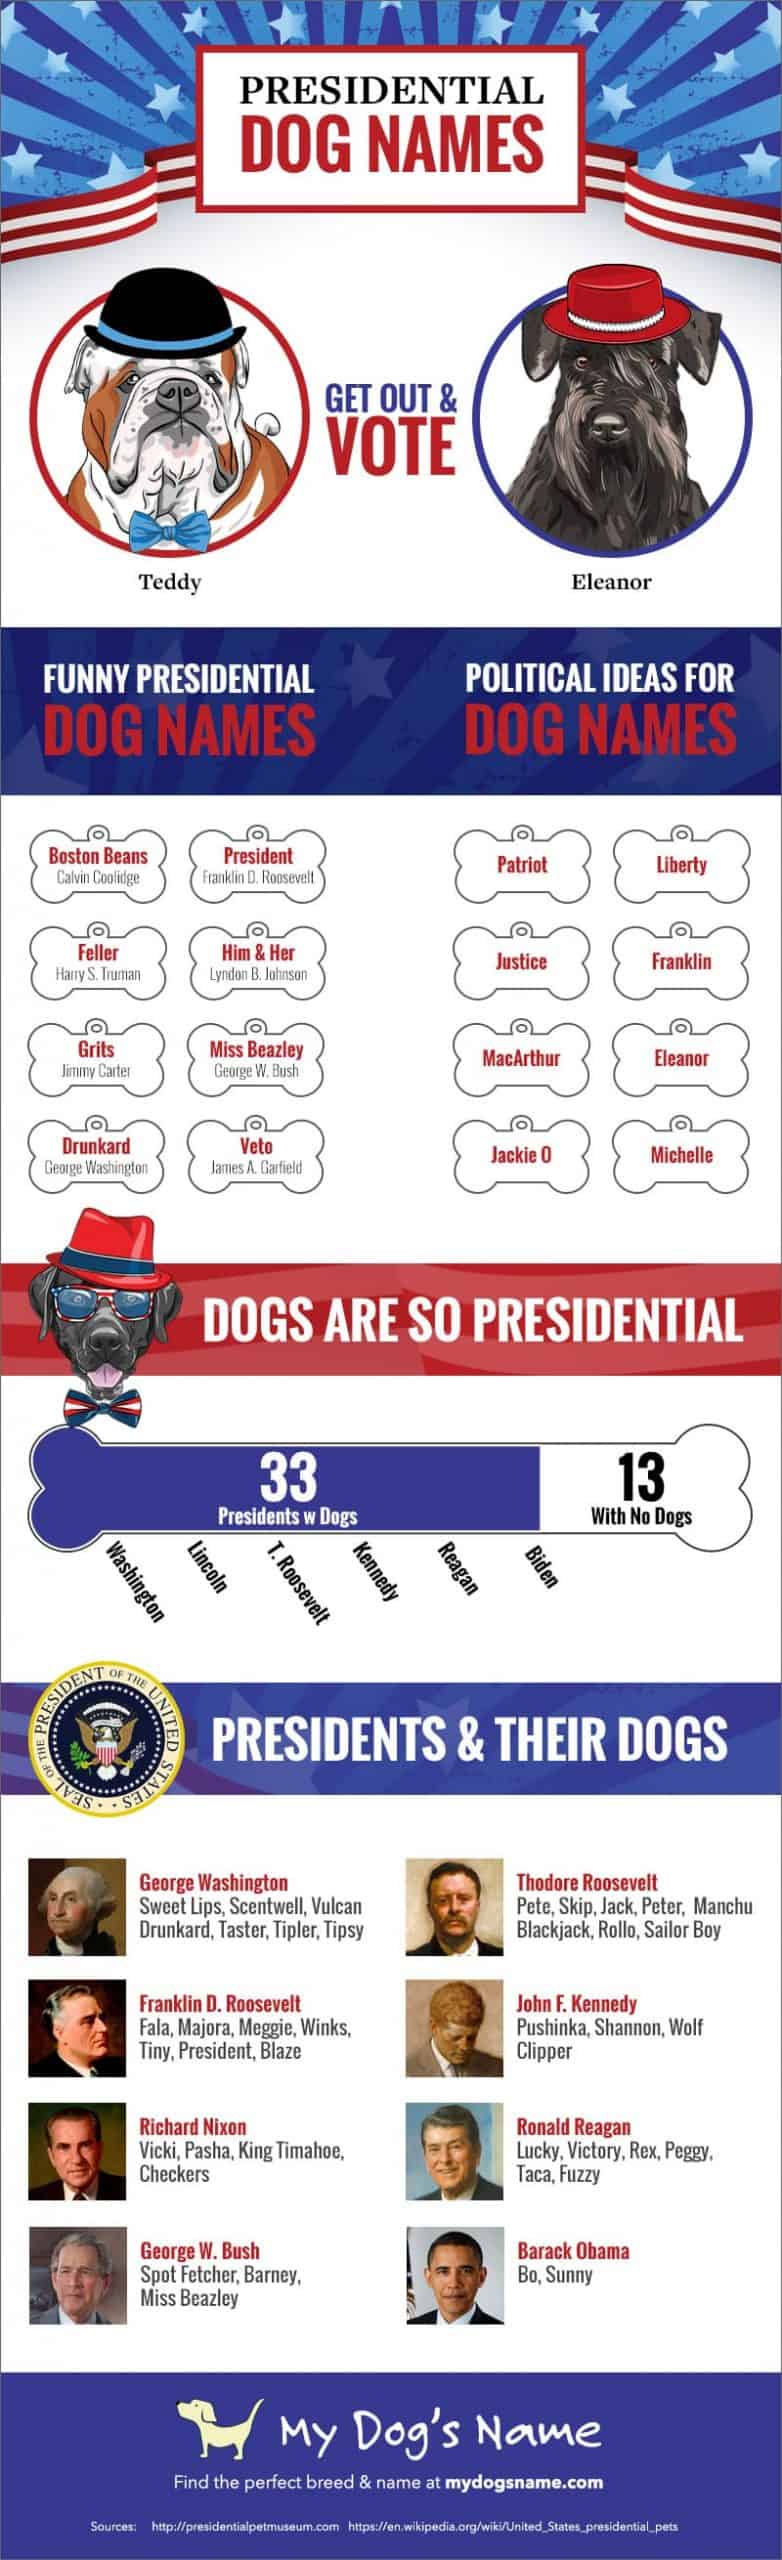 presidential dog names infographic